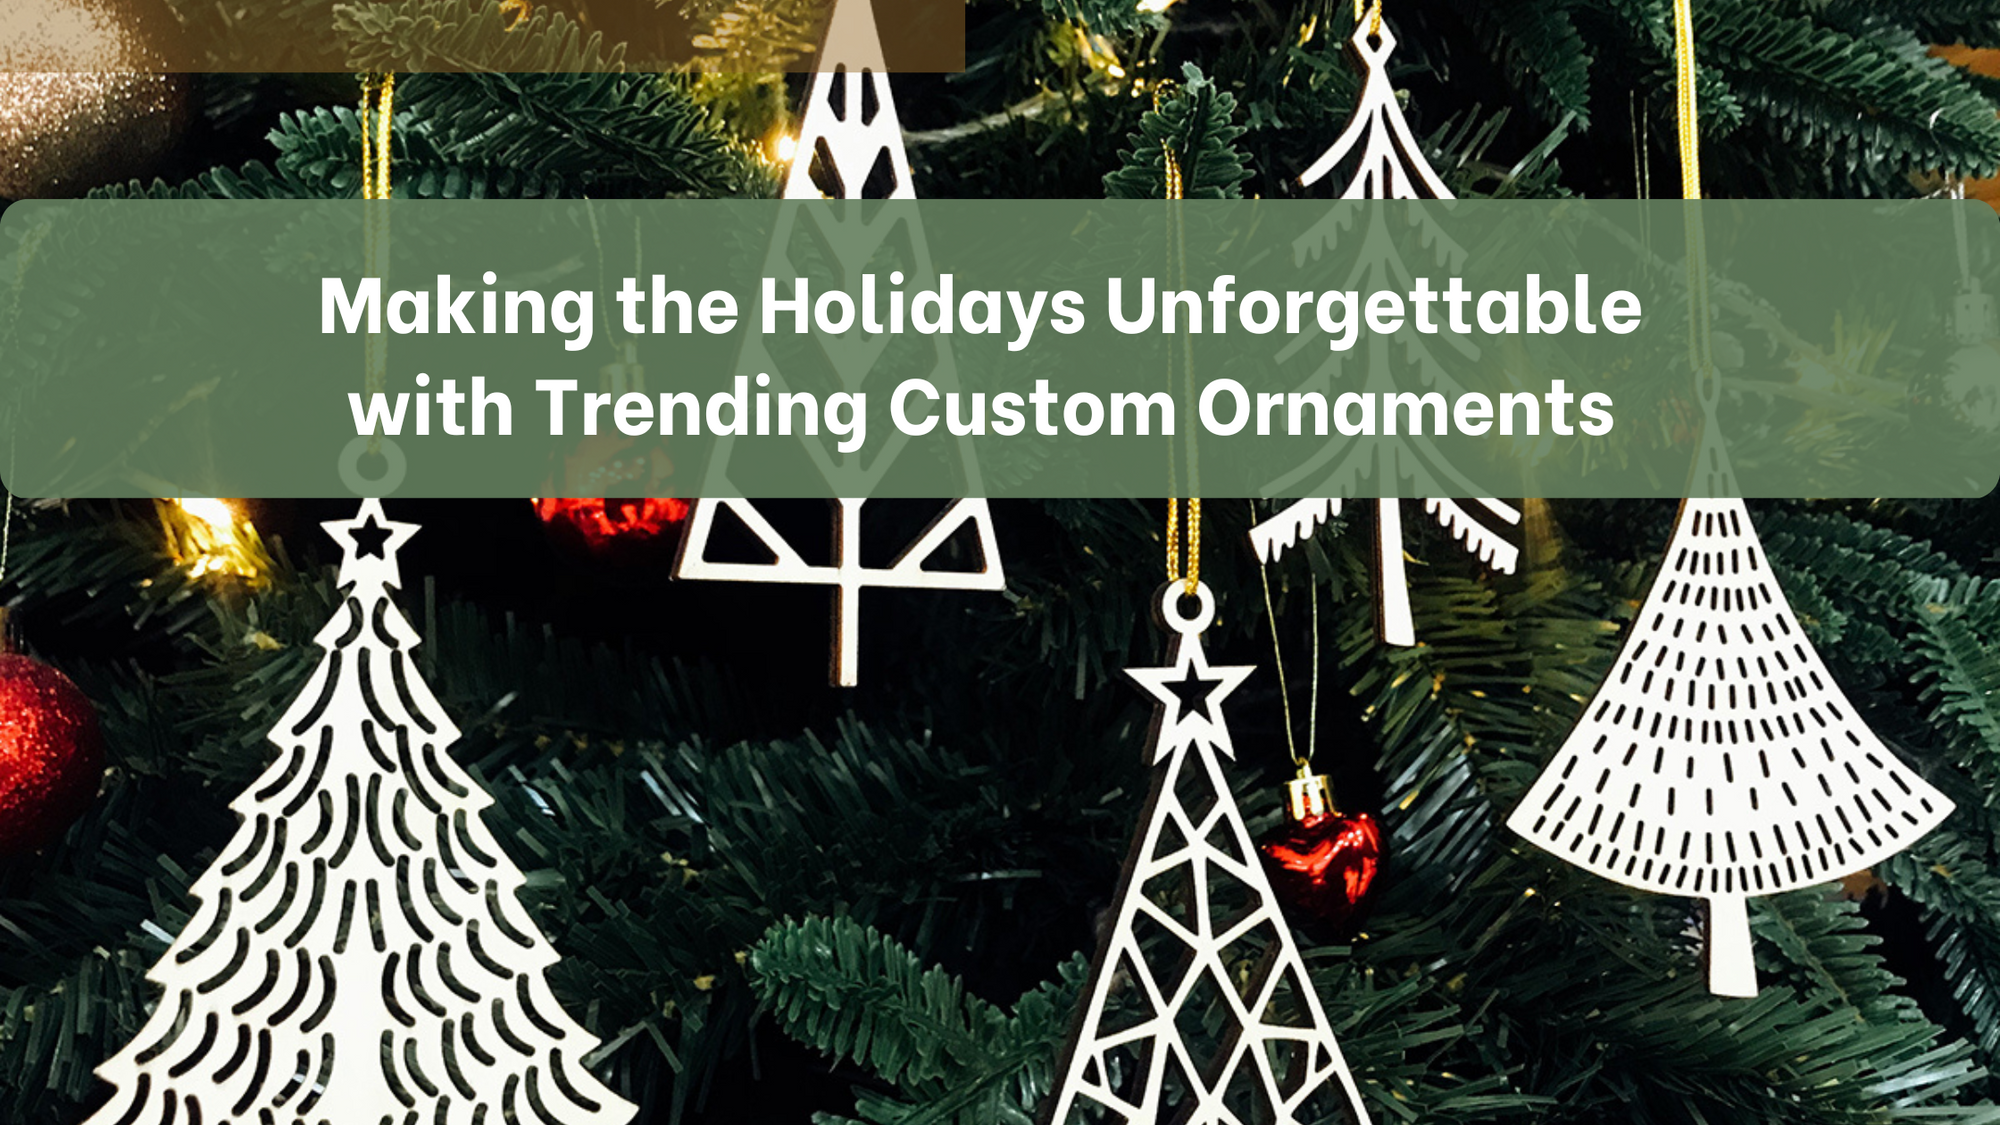 Making the Holidays Unforgettable with Trending Custom Ornaments